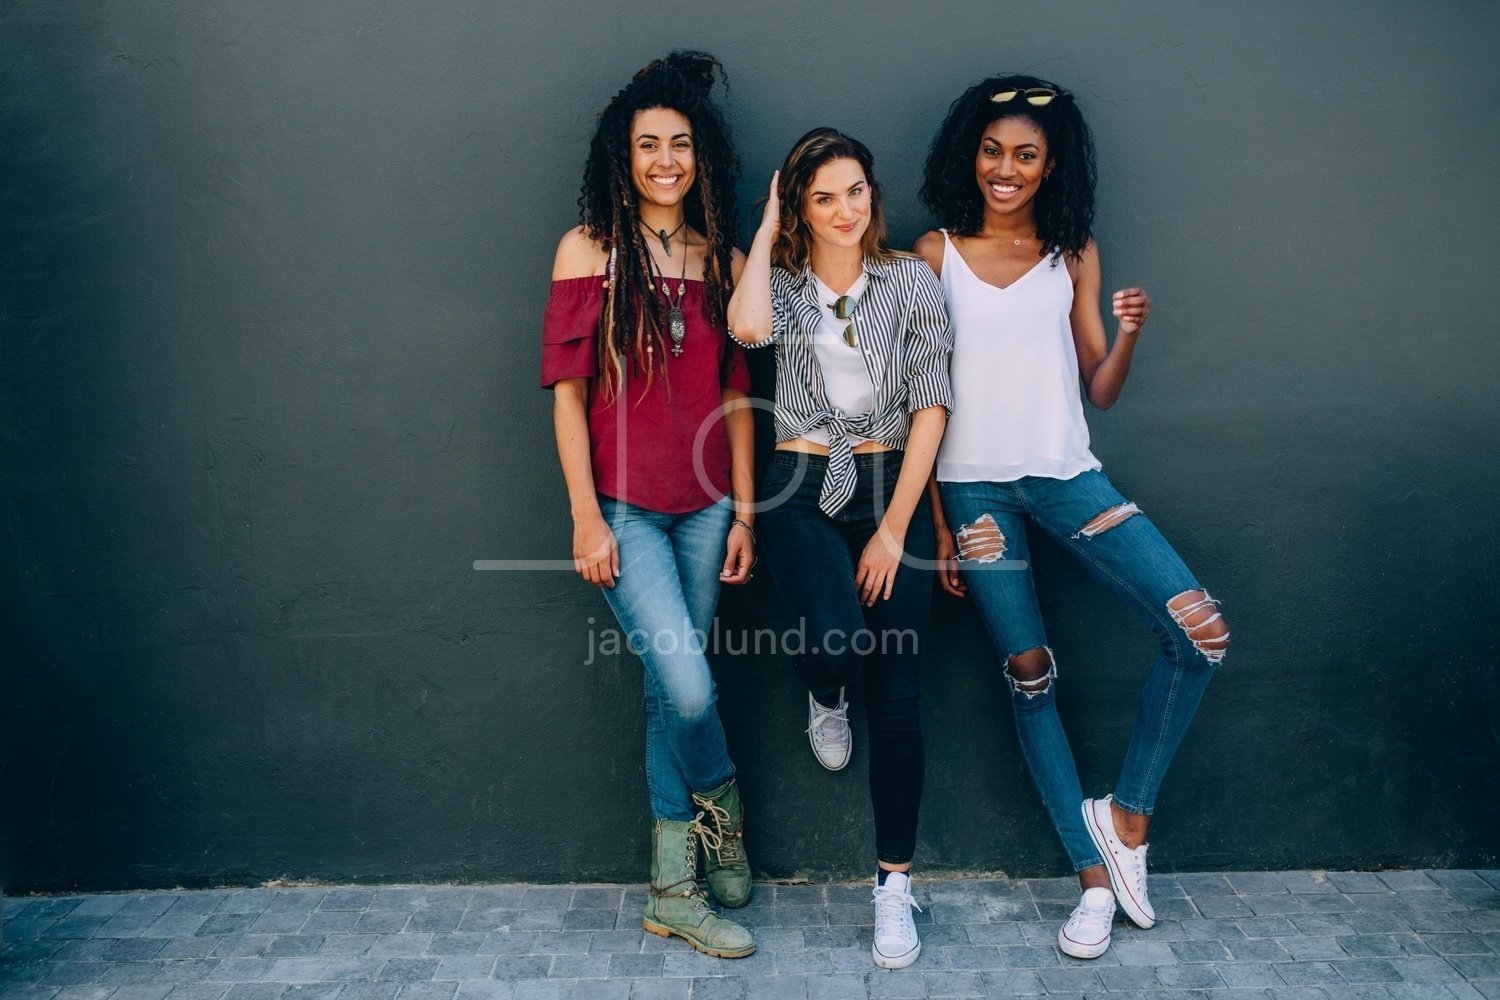 20 Best Friends Photo Ideas to try - Picsy